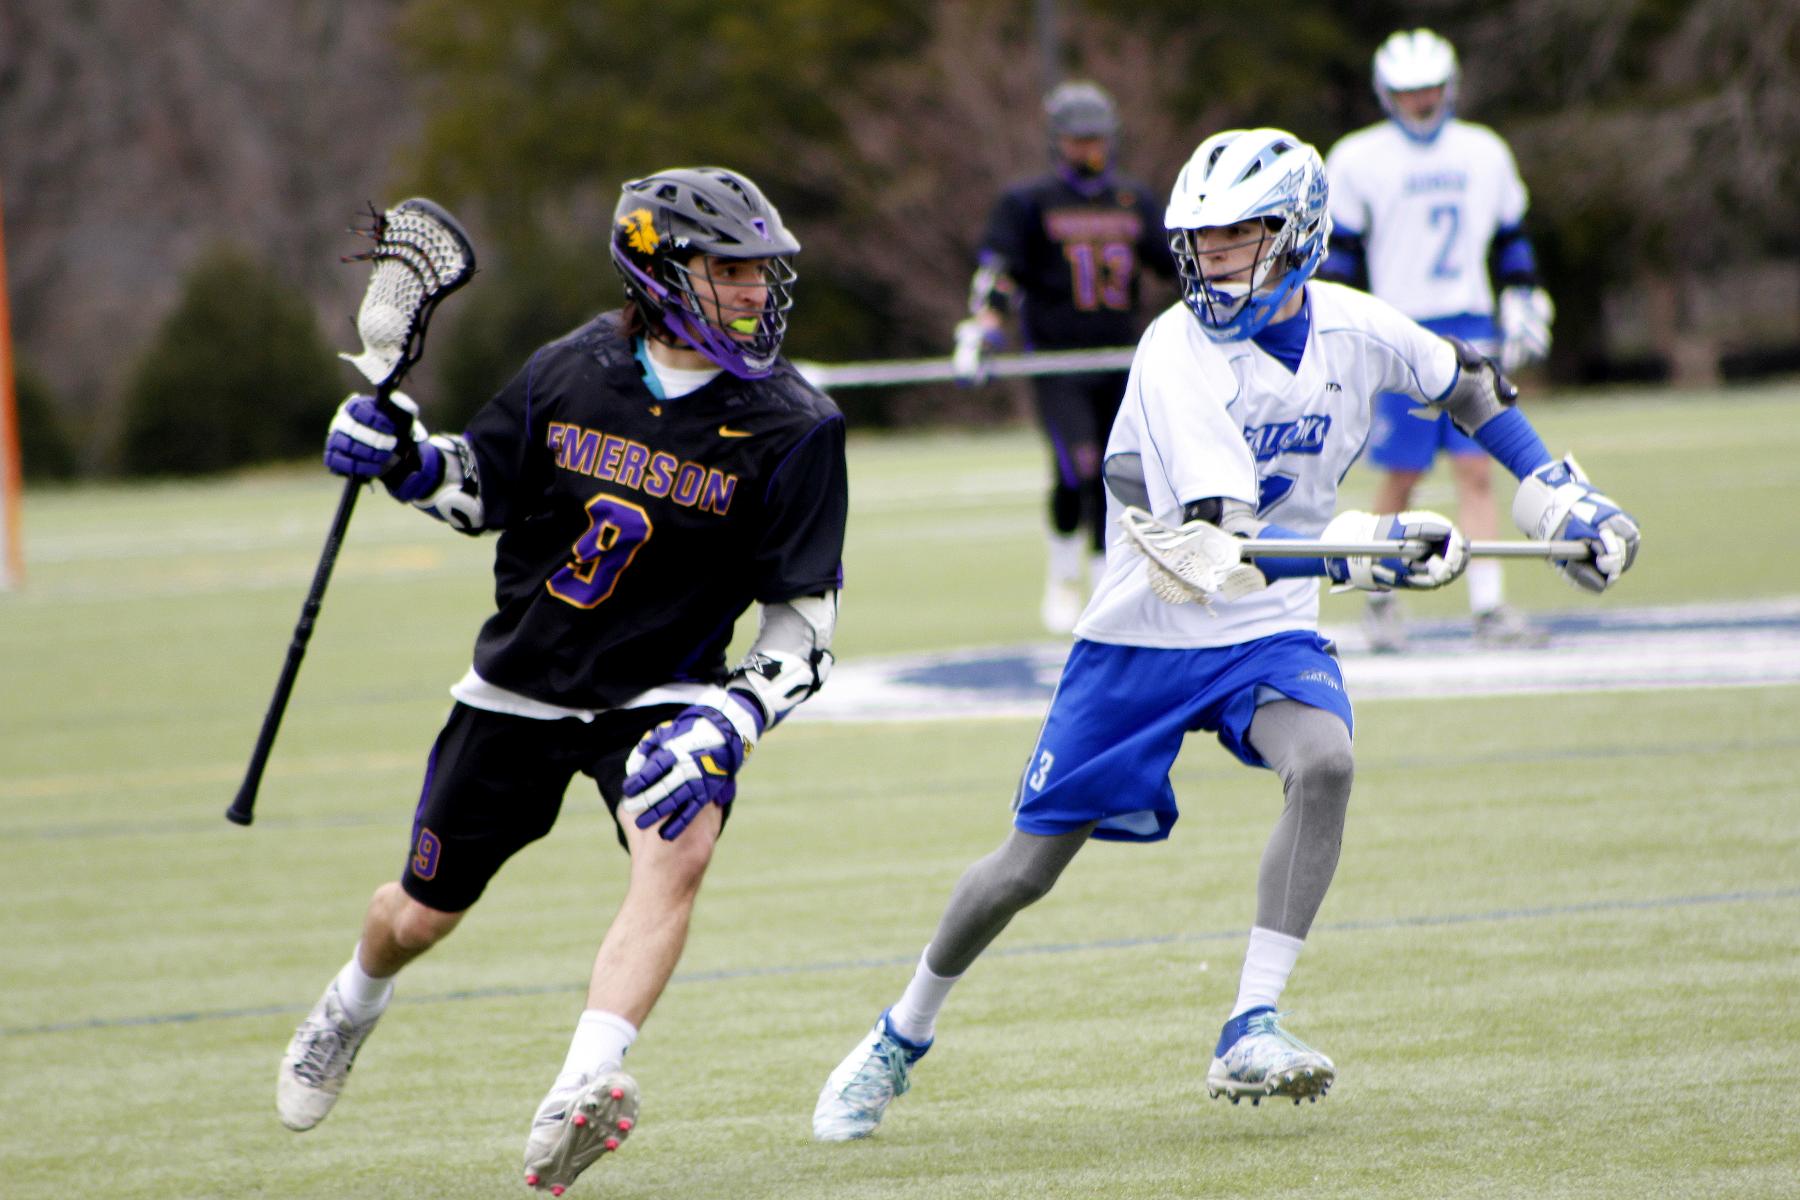 Men's Lacrosse Stays Perfect at Home with Non-Conference Win Versus Emerson